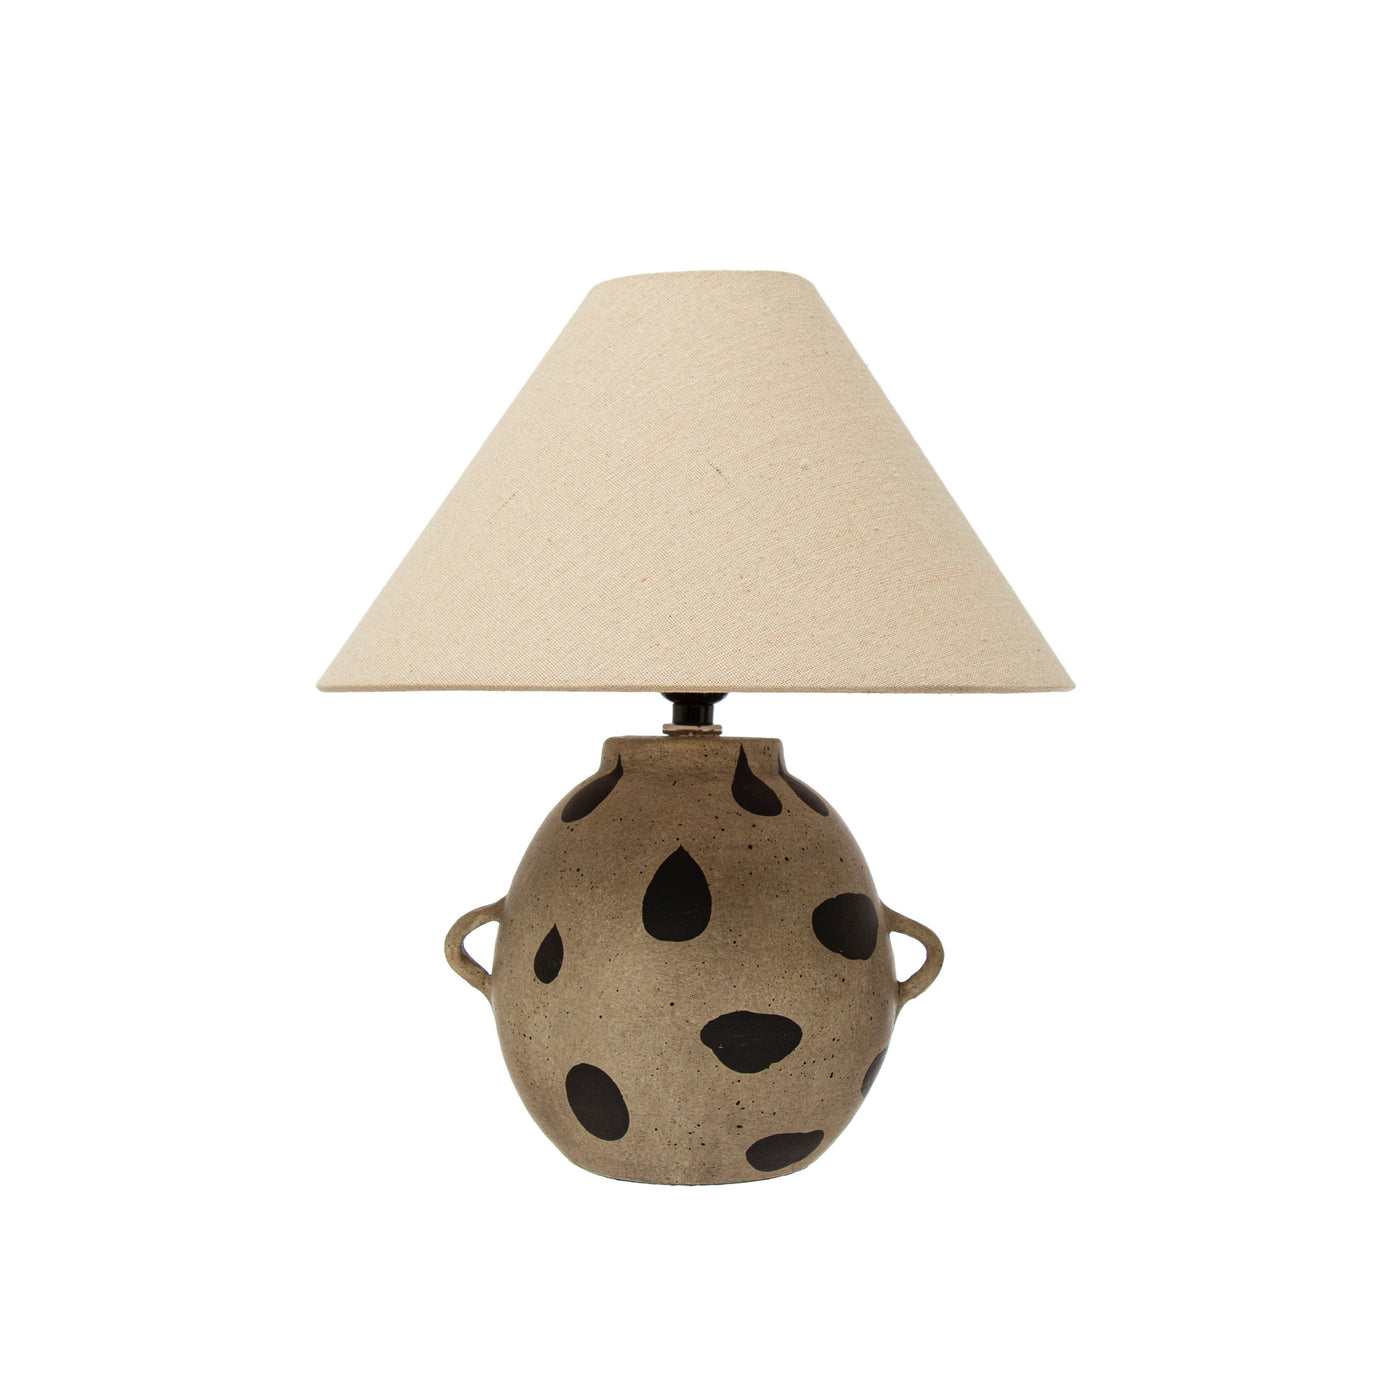 Terra-cotta Table Lamp with Dots